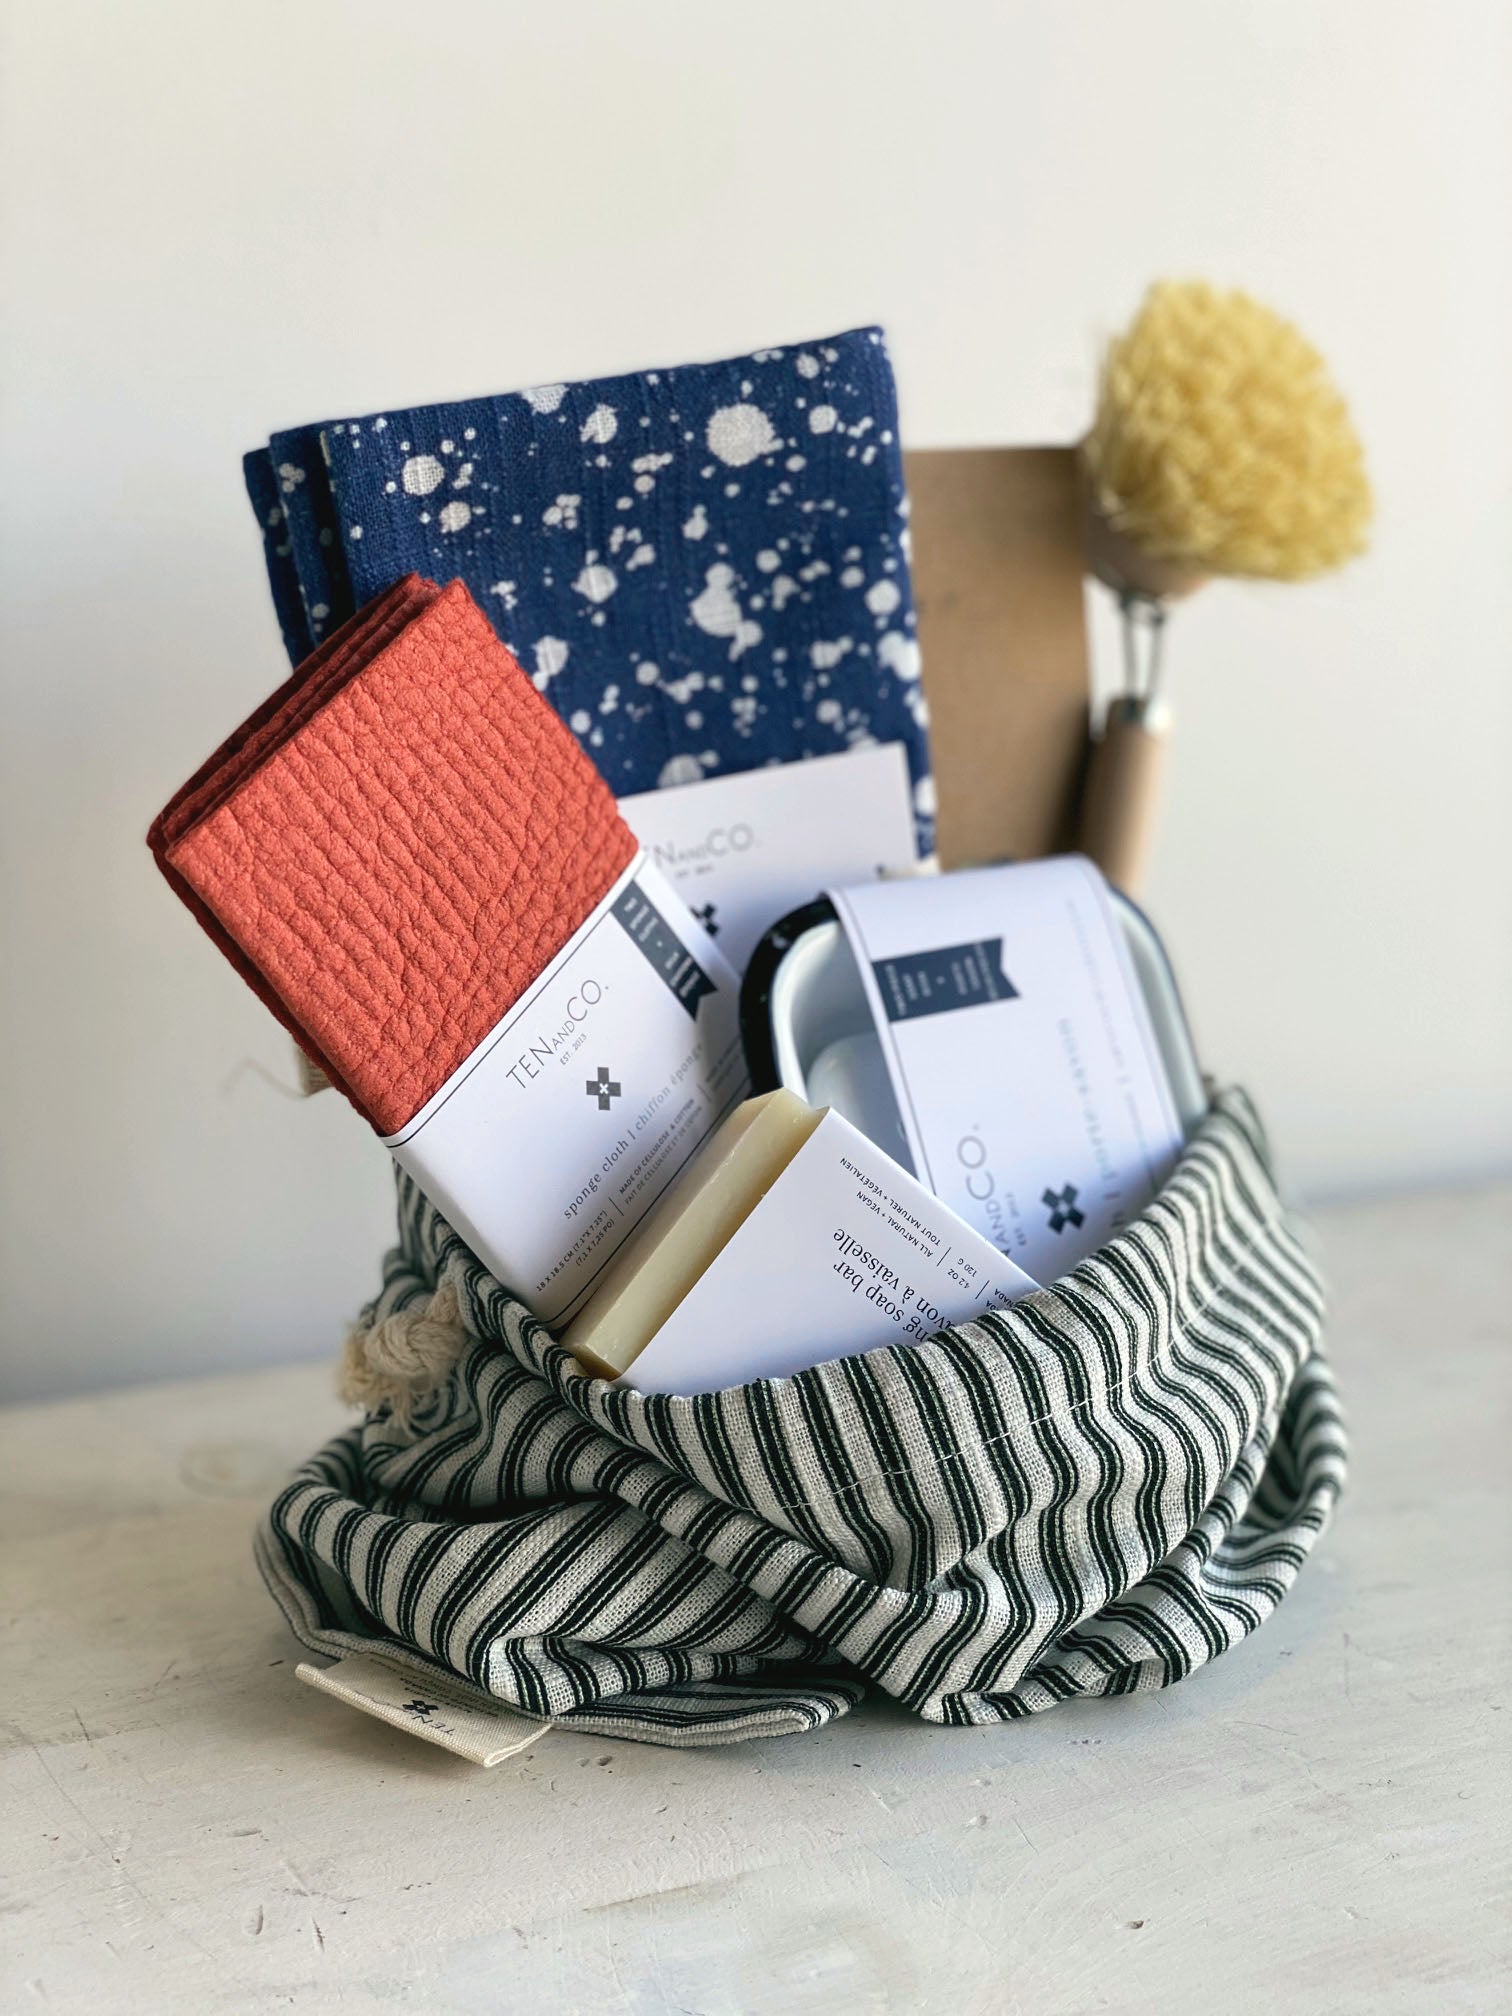 Angled photo of Gift Bag with Ten and Co items inside. Photo on a white surface against a white wall. Deep green and white vertical striped gift bag is propped open with the following items inside. Left to right; Rust solid 2pk, Splatter Denim Napkins, Beeswax Wraps, Scrub Brush. In front of these items in the bag, is a Dishwashing Soap Bar and an Enamel Soap Dish. 